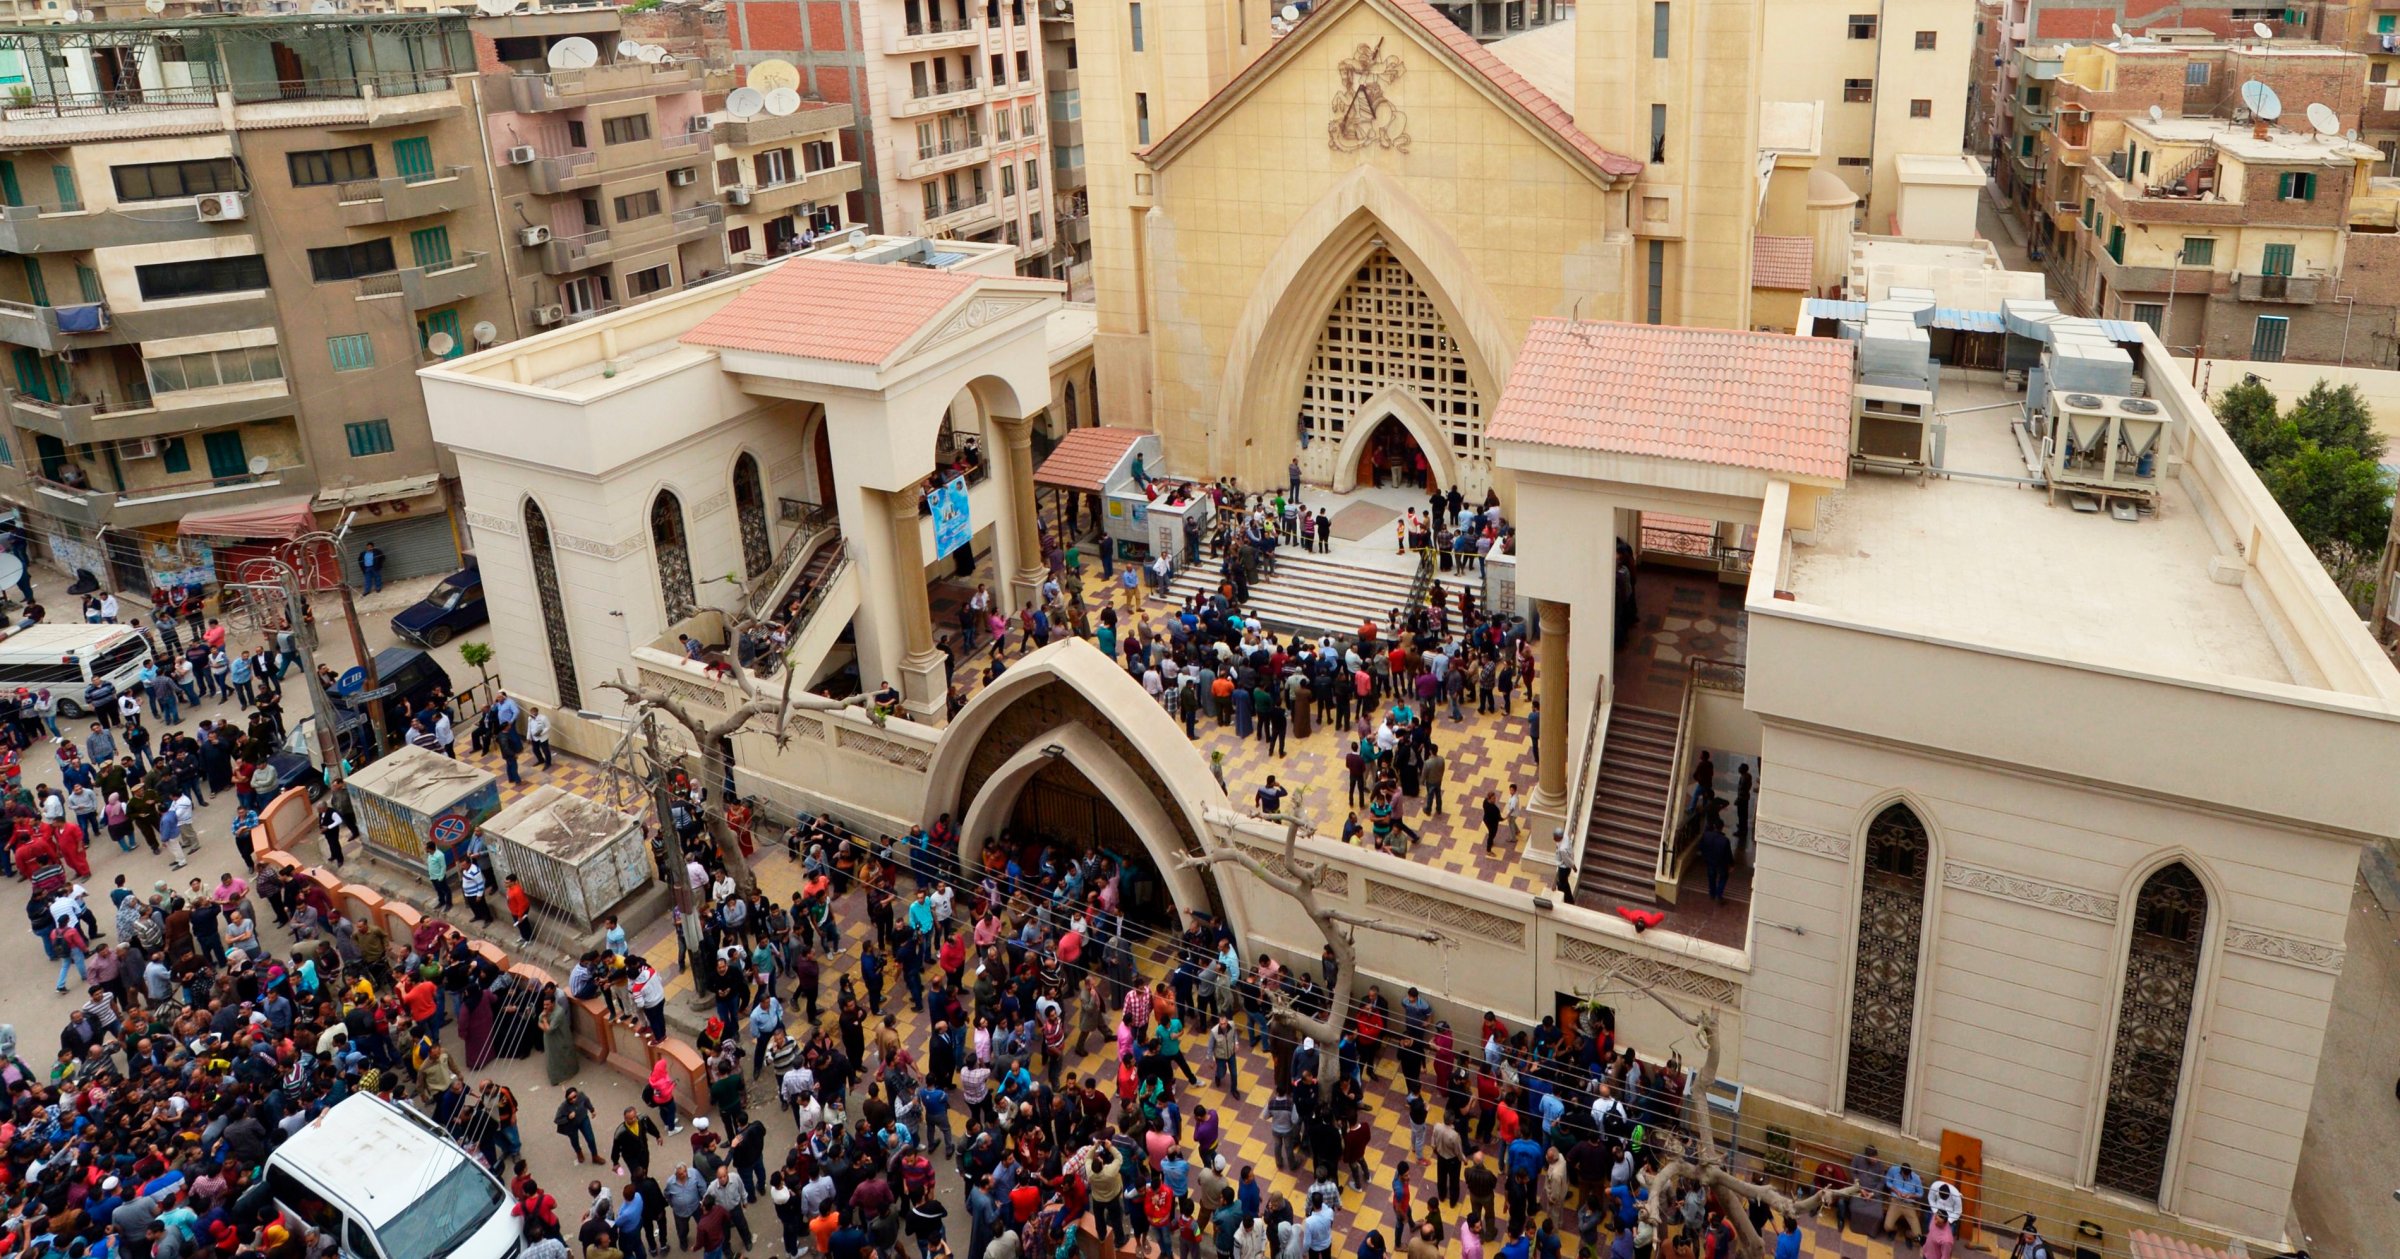 A general view shows people gathering outside the Mar Girgis Coptic Church in the Nile Delta City of Tanta, 120 kilometres (75 miles) north of Cairo, after a bomb blast struck worshippers gathering to celebrate Palm Sunday on April 9, 2017. / AFP PHOTO / KHALED DESOUKI (Photo credit should read KHALED DESOUKI/AFP/Getty Images)